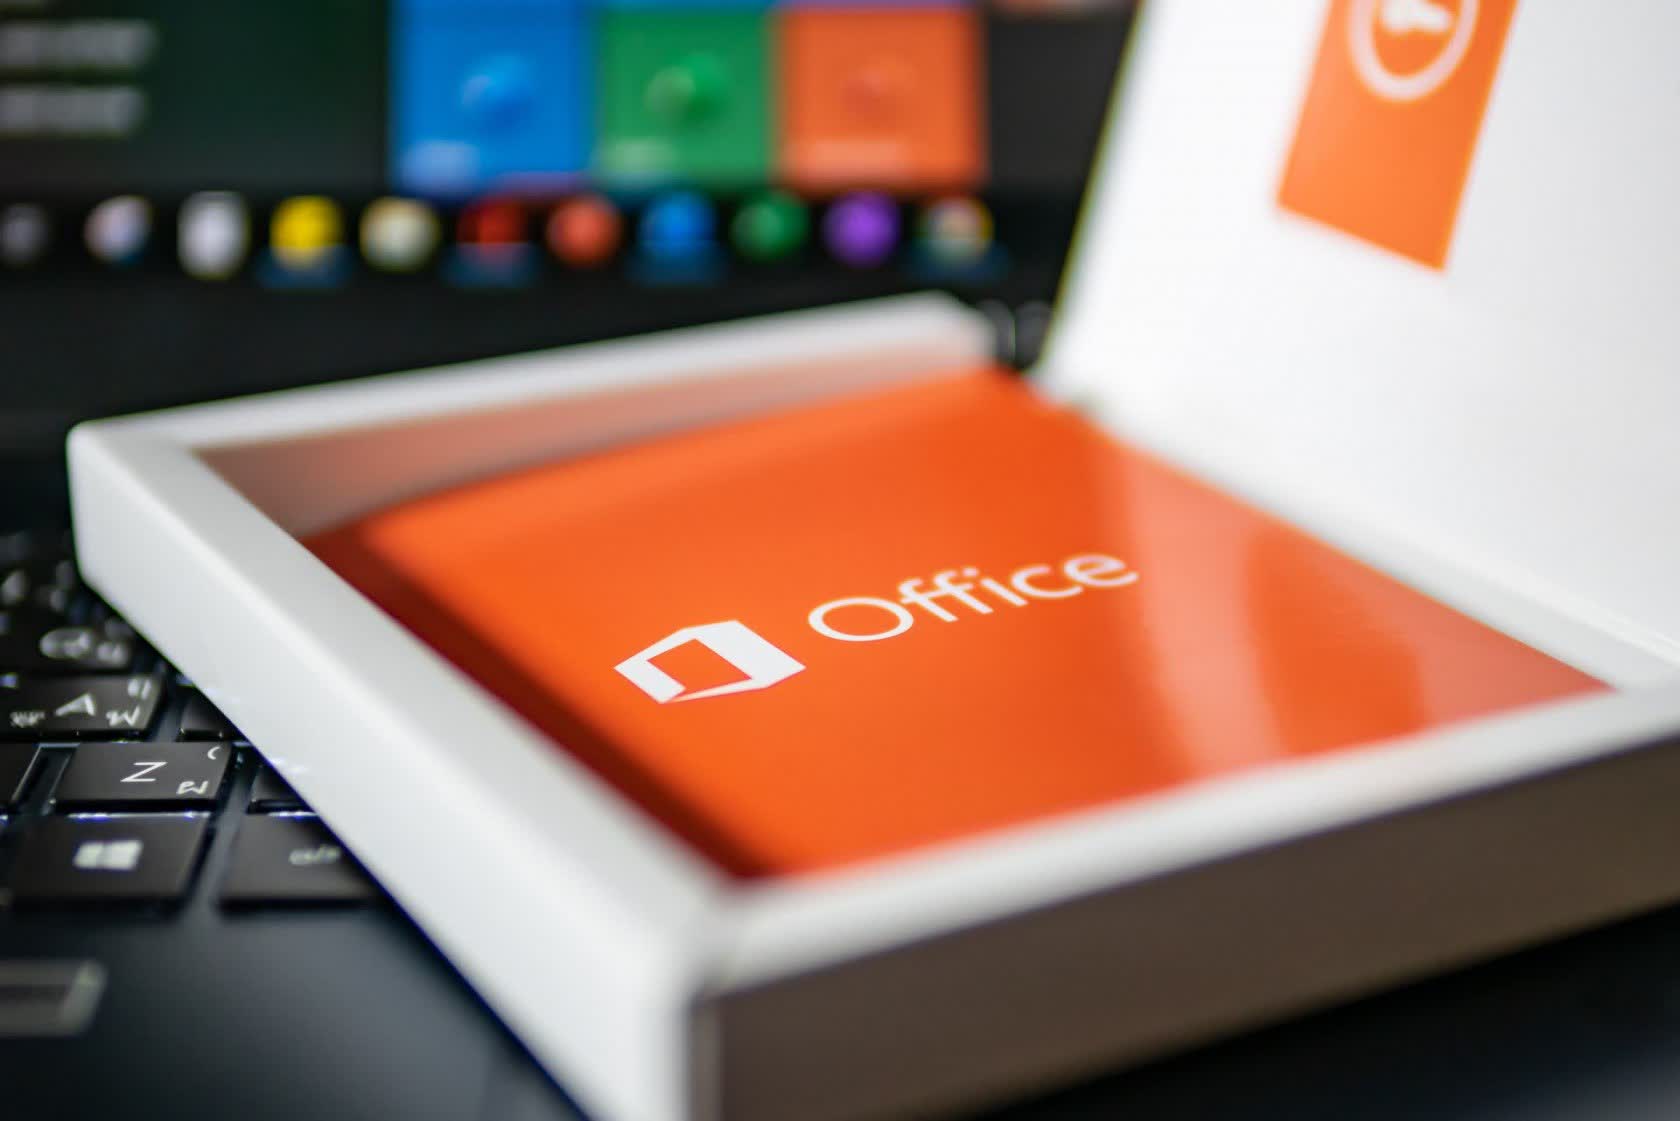 Microsoft Office will start blocking downloaded macros by default